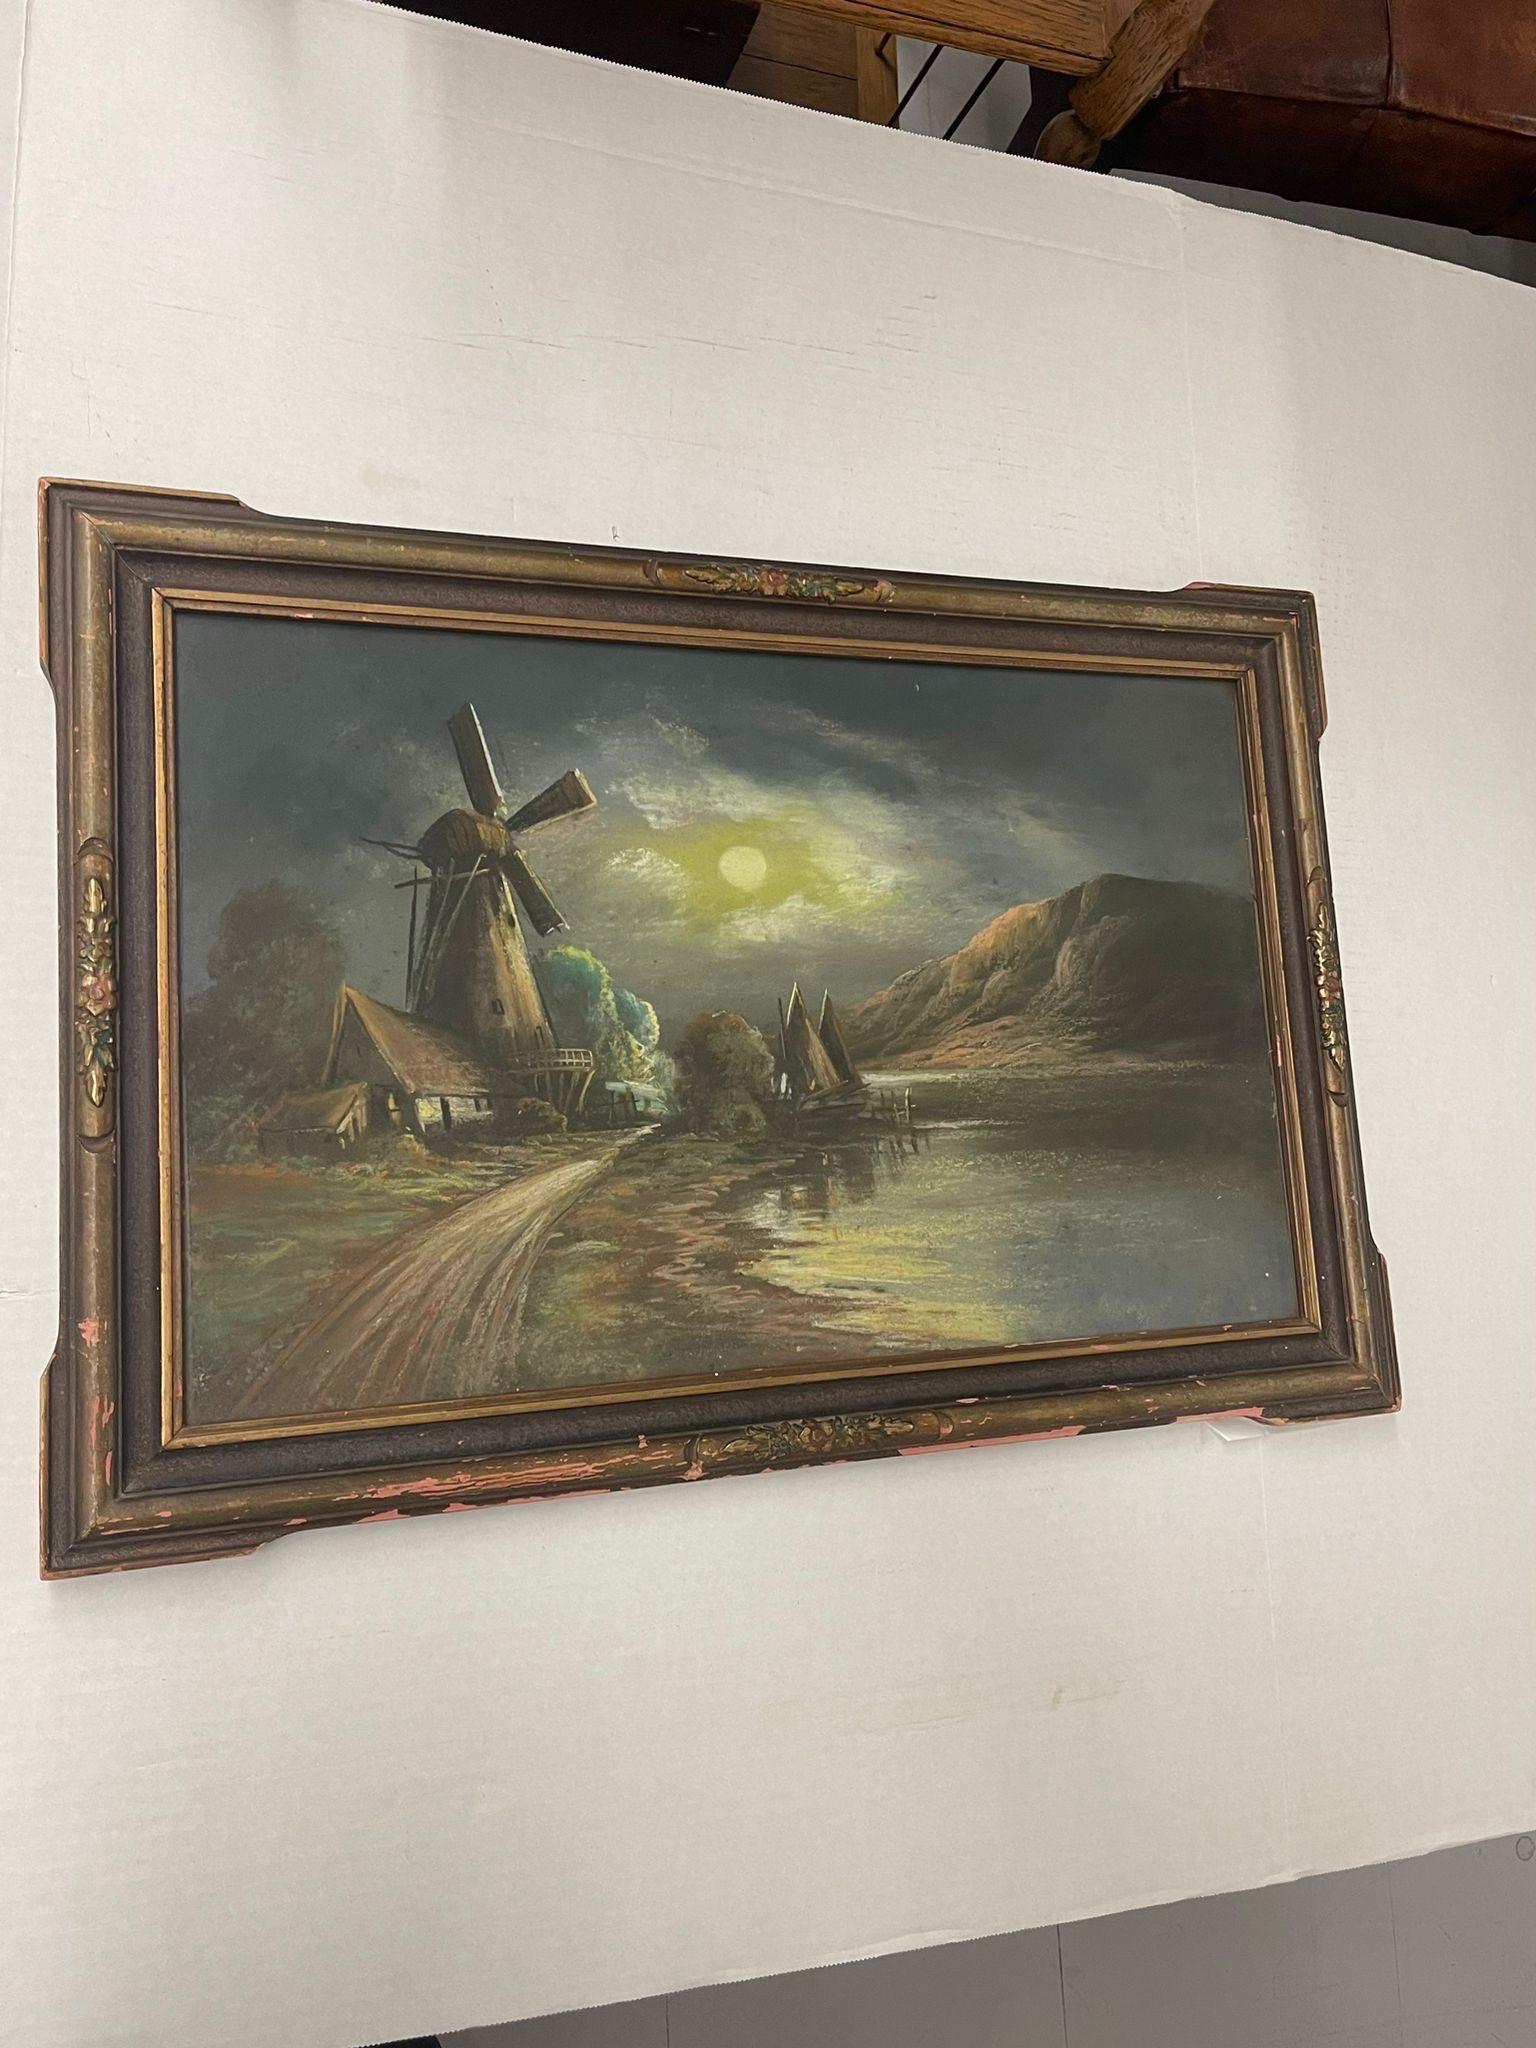 Possibly Oil or Pastel on Paper. Frame Has Been Reinforced on the back. Frame has Floral Motifs. Frame Circa 1920s. Vintage Condition Consistent with Age as Pictured.

Dimensions. 26 W ; 1 D ; 17 1/2 H